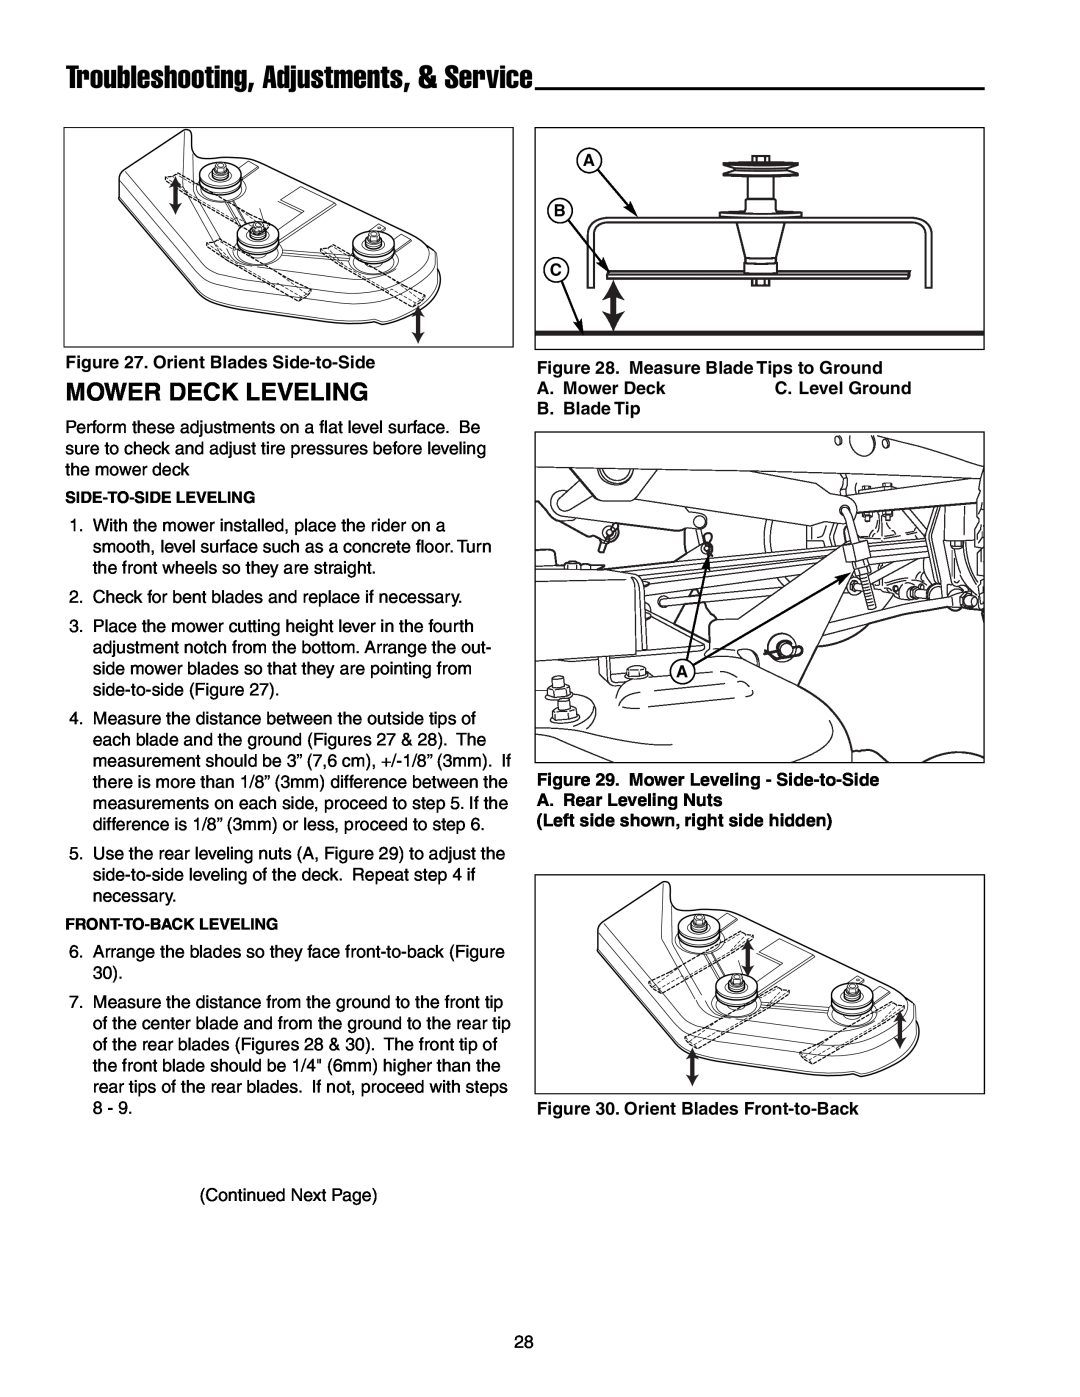 Simplicity 250 Z Mower Deck Leveling, Troubleshooting, Adjustments, & Service, Orient Blades Side-to-Side, C. Level Ground 